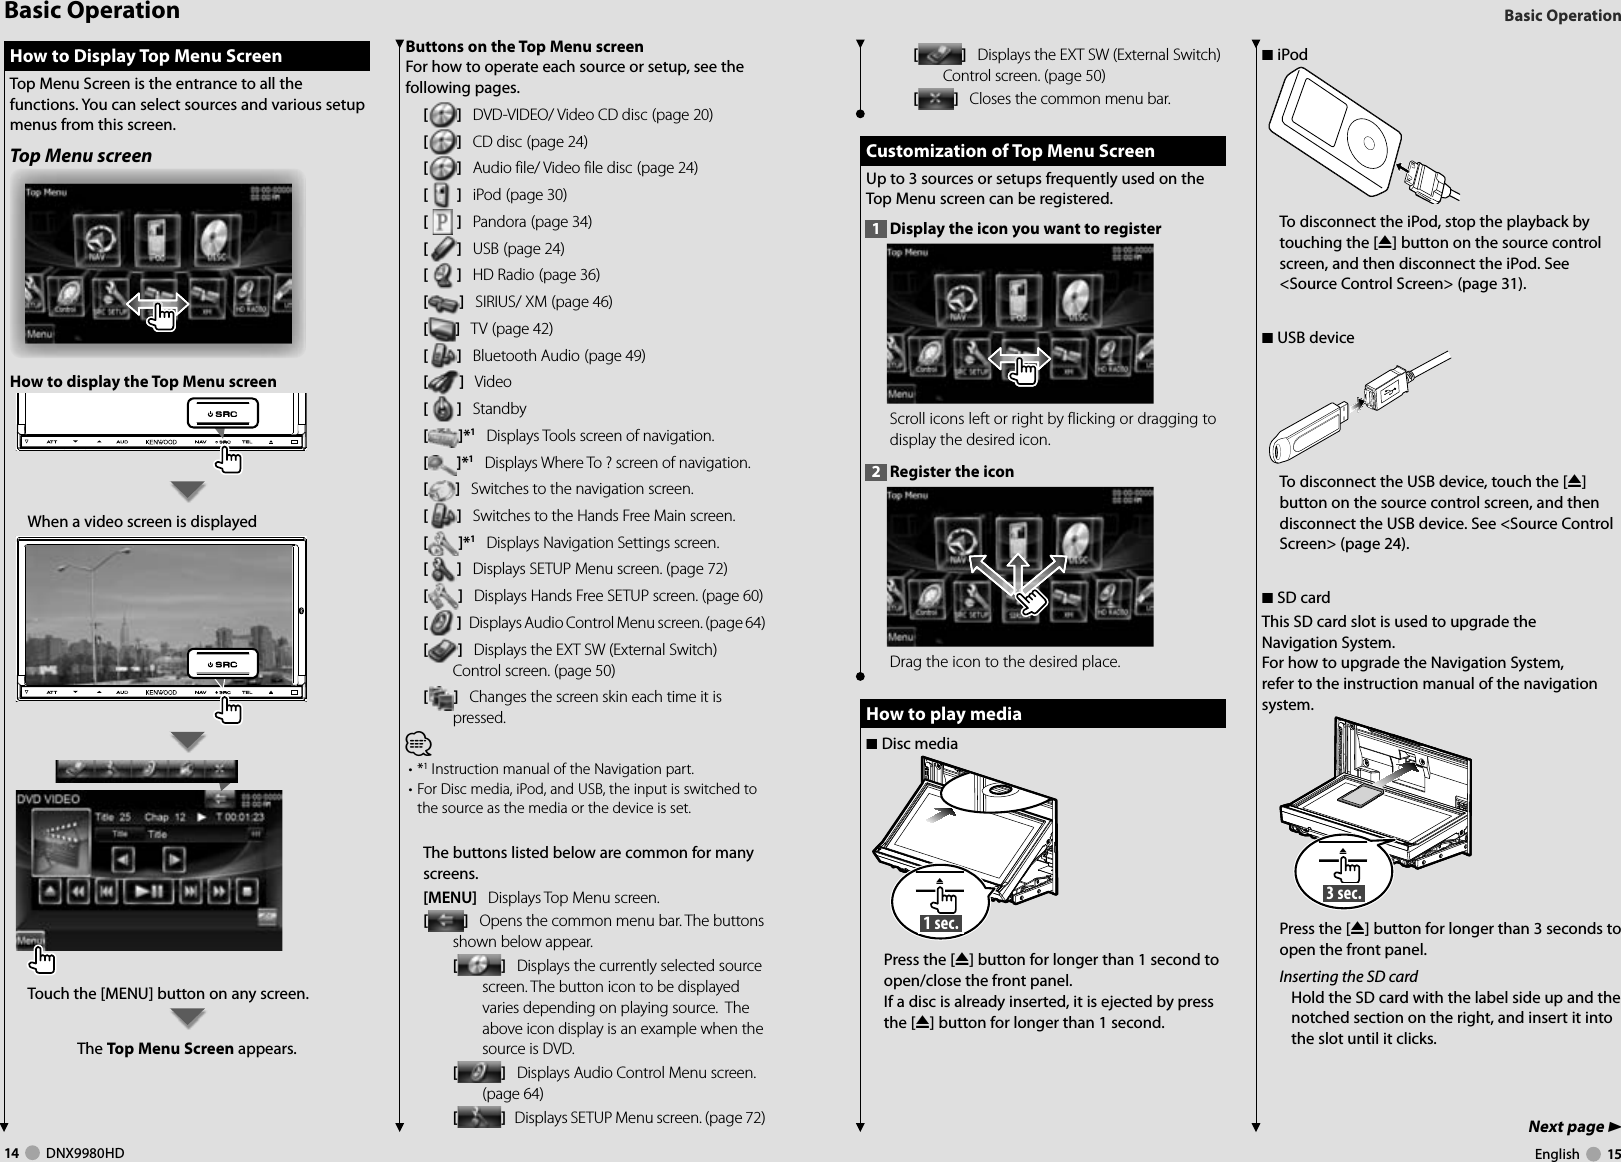 14     DNX9980HD  English     15Next page 3Basic OperationBasic OperationButtons on the Top Menu screenFor how to operate each source or setup, see the following pages.[]   DVD-VIDEO/ Video CD disc  (page 20)[]   CD disc  (page 24)[]   Audio file/ Video file disc  (page 24)[]   iPod  (page 30)[]   Pandora  (page 34)[]   USB  (page 24)[]   HD Radio  (page 36)[]   SIRIUS/ XM  (page 46)[]   TV  (page 42)[]   Bluetooth Audio  (page 49)[]   Video[]   Standby[]*1   Displays Tools screen of navigation.[]*1   Displays Where To ? screen of navigation.[]   Switches to the navigation screen.[]   Switches to the Hands Free Main screen.[]*1   Displays Navigation Settings screen. []   Displays SETUP Menu screen. (page 72)[]   Displays Hands Free SETUP screen. (page 60)[]   Displays Audio Control Menu screen. (page 64)[]   Displays the EXT SW (External Switch) Control screen. (page 50) []   Changes the screen skin each time it is pressed.⁄• *1  Instruction manual of the Navigation part. • For Disc media, iPod, and USB, the input is switched to the source as the media or the device is set.The buttons listed below are common for many screens.[MENU]   Displays Top Menu screen. []   Opens the common menu bar. The buttons shown below appear.[]   Displays the currently selected source screen. The button icon to be displayed varies depending on playing source.  The above icon display is an example when the source is DVD.[]   Displays Audio Control Menu screen. (page 64)[]   Displays SETUP Menu screen. (page 72) How to Display Top Menu Screen How to Display Top Menu ScreenTop Menu Screen is the entrance to all the functions. You can select sources and various setup menus from this screen.Top Menu screenHow to display the Top Menu screenWhen a video screen is displayedTouch the [MENU] button on any screen.The Top Menu Screen appears.[]   Displays the EXT SW (External Switch) Control screen. (page 50) []   Closes the common menu bar.Customization of Top Menu ScreenCustomization of Top Menu ScreenUp to 3 sources or setups frequently used on the Top Menu screen can be registered.1  Display the icon you want to registerScroll icons left or right by flicking or dragging to display the desired icon.2  Register the iconDrag the icon to the desired place. How to play media How to play media7 Disc media0 1 sec. Press the [0] button for longer than 1 second to open/close the front panel.If a disc is already inserted, it is ejected by press the [0] button for longer than 1 second.7 iPodTo disconnect the iPod, stop the playback by touching the [0] button on the source control screen, and then disconnect the iPod. See &lt;Source Control Screen&gt; (page 31).7 USB deviceTo disconnect the USB device, touch the [0] button on the source control screen, and then disconnect the USB device. See &lt;Source Control Screen&gt; (page 24).7 SD cardThis SD card slot is used to upgrade the Navigation System.For how to upgrade the Navigation System, refer to the instruction manual of the navigation system.0 3 sec. Press the [0] button for longer than 3 seconds to open the front panel. Inserting the SD cardHold the SD card with the label side up and the notched section on the right, and insert it into the slot until it clicks. DNX9980HD_K_English.indd   14-15 10/11/04   18:22